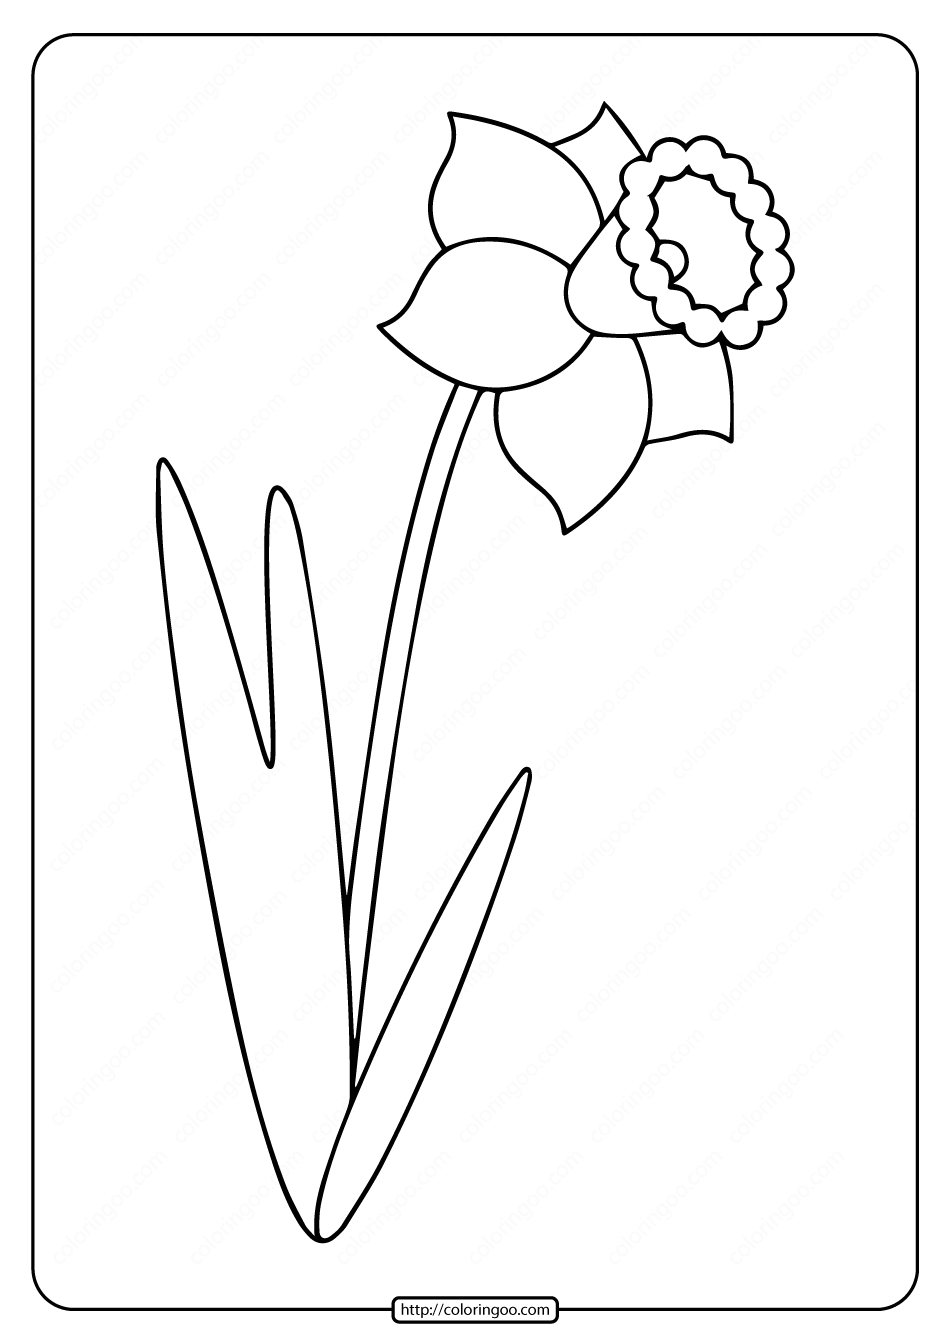 printable simple flower drawing coloring pages